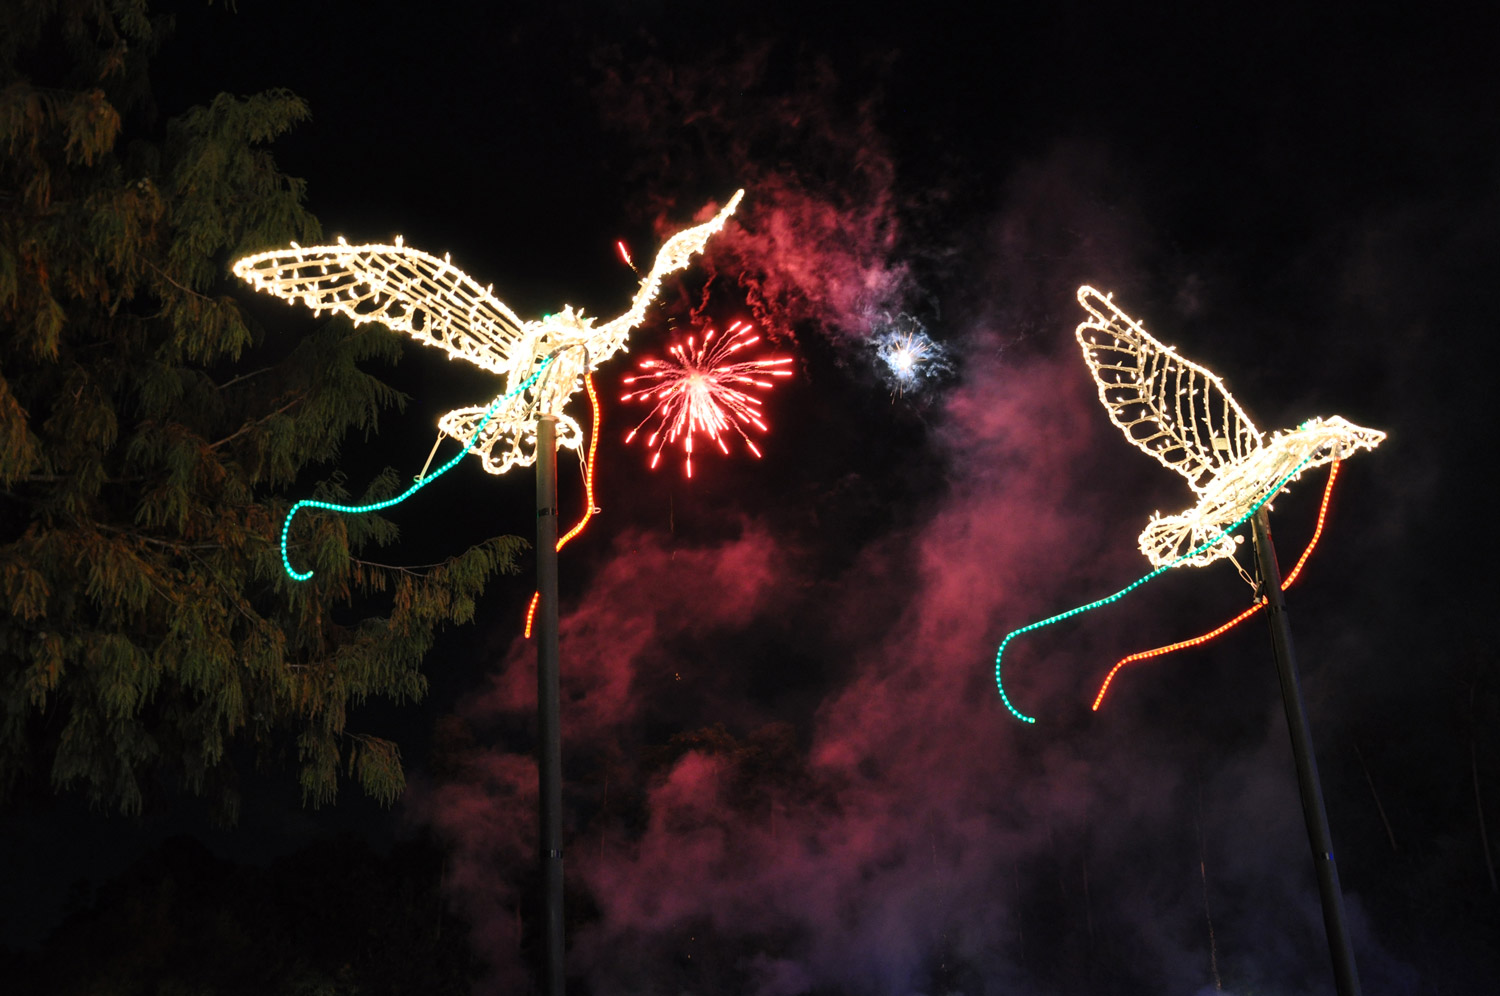 The Lighting of the Doves is a Woodlands holiday tradition like no other.